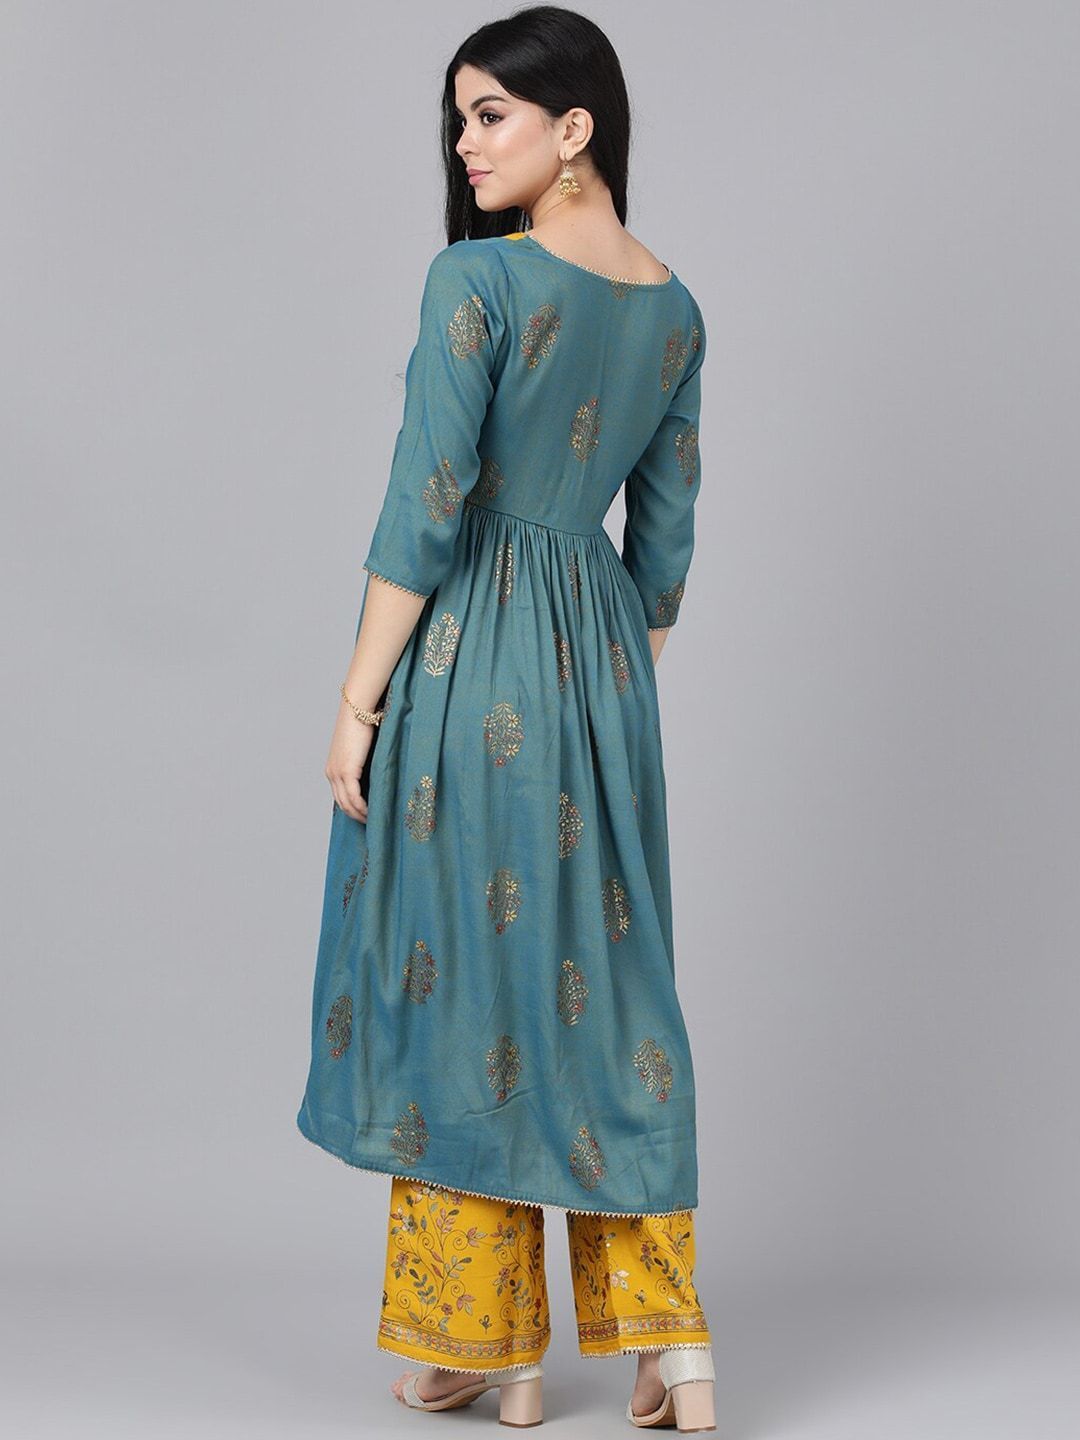 Women's  Mustard Yellow & Blue Floral Embroidered Kurta with Palazzos & Jacket - AKS